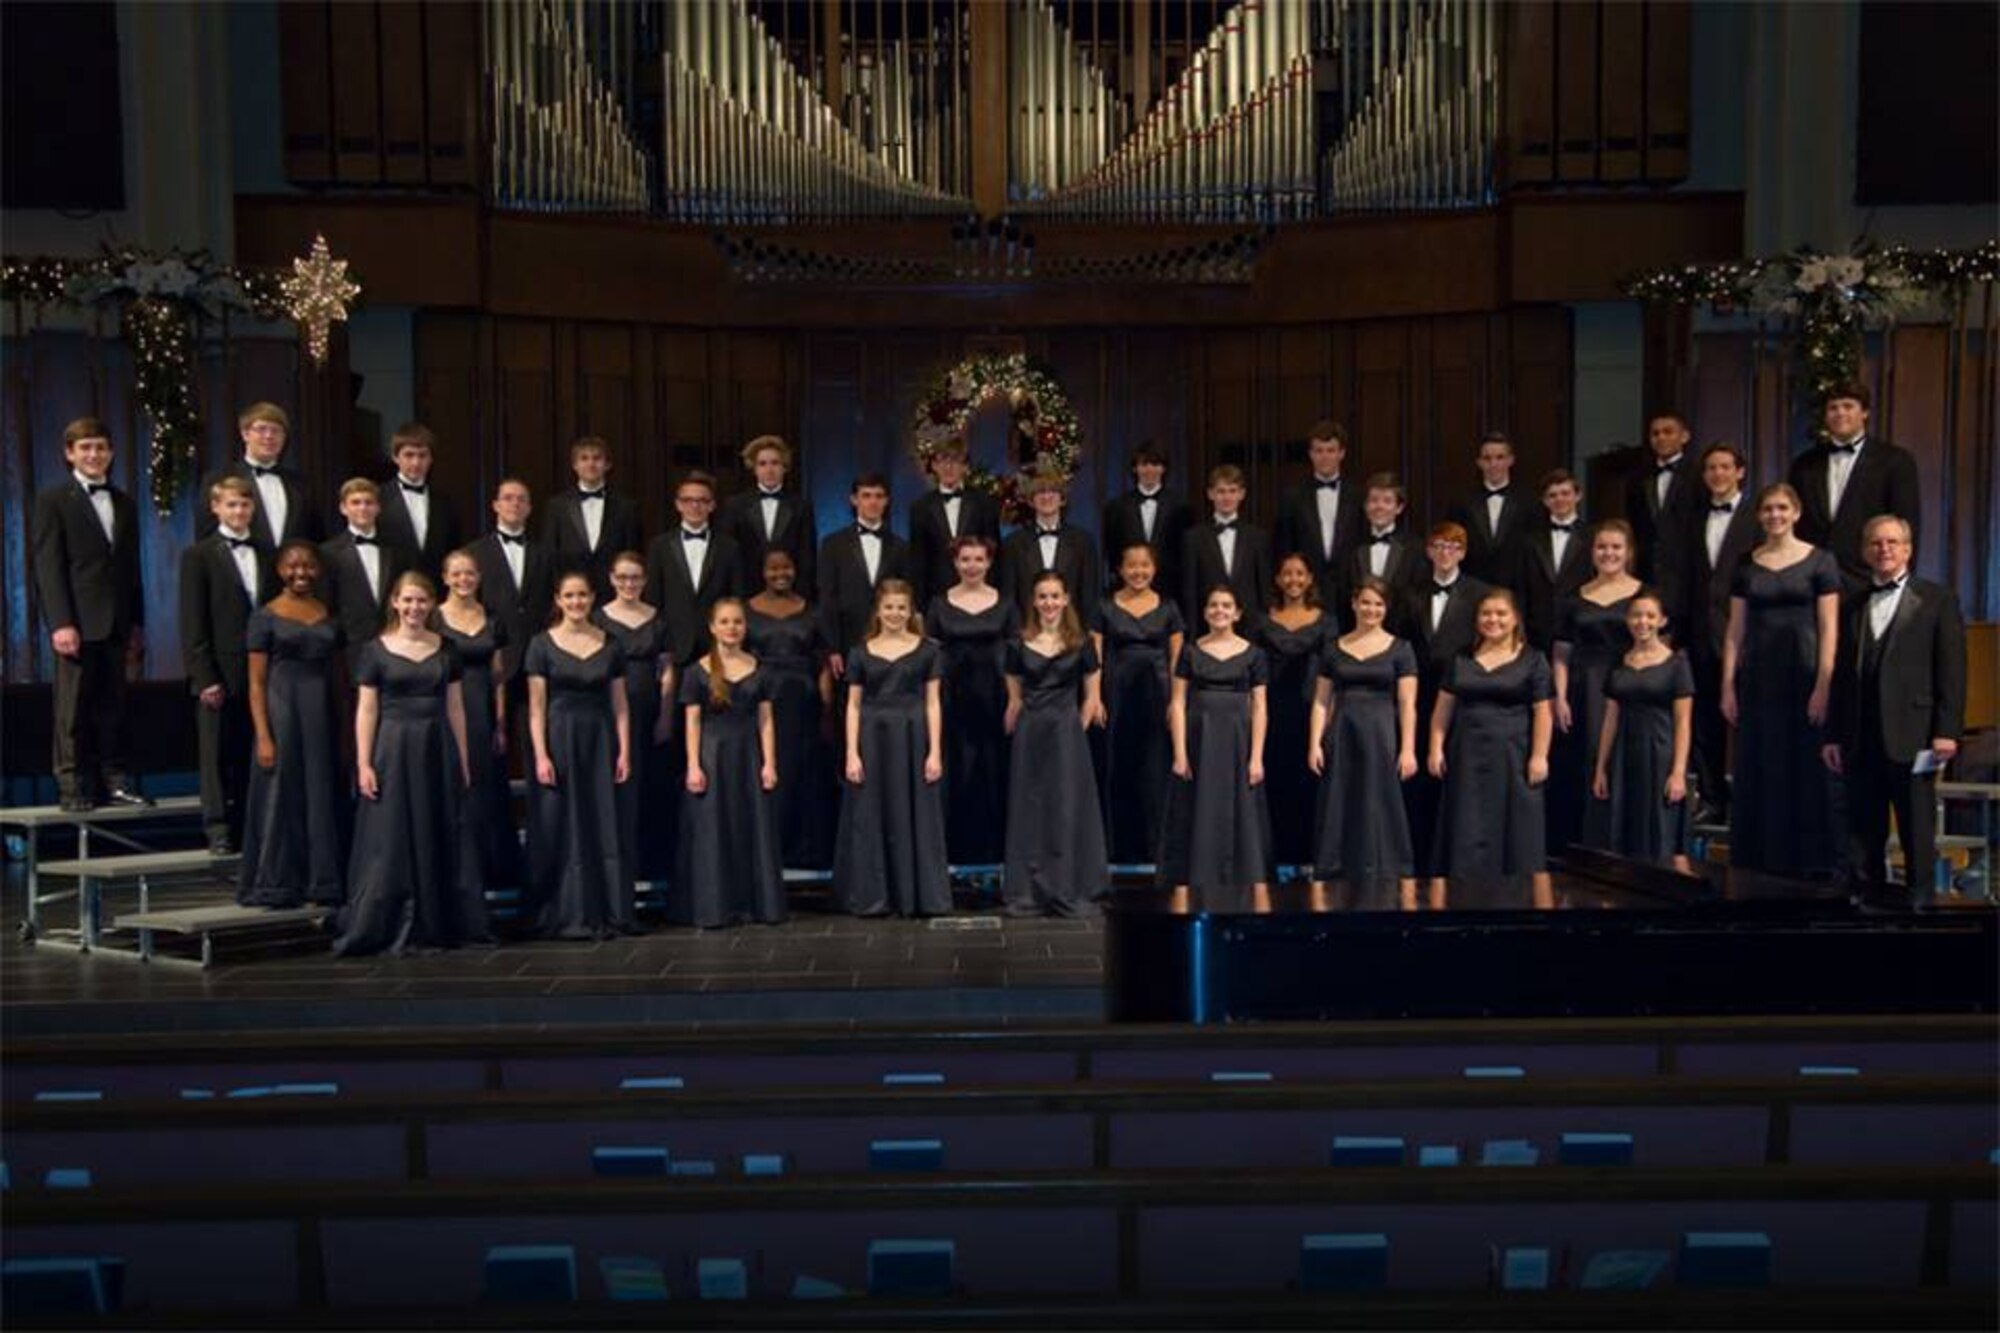 DAYTON, Ohio --The Kettering Children's Choir consists of four separate choirs (Chorus, Chorale, Concert Choir, and Cappella). Pictured here is the Cappella Choir. (Photo by Adam Alonzo)